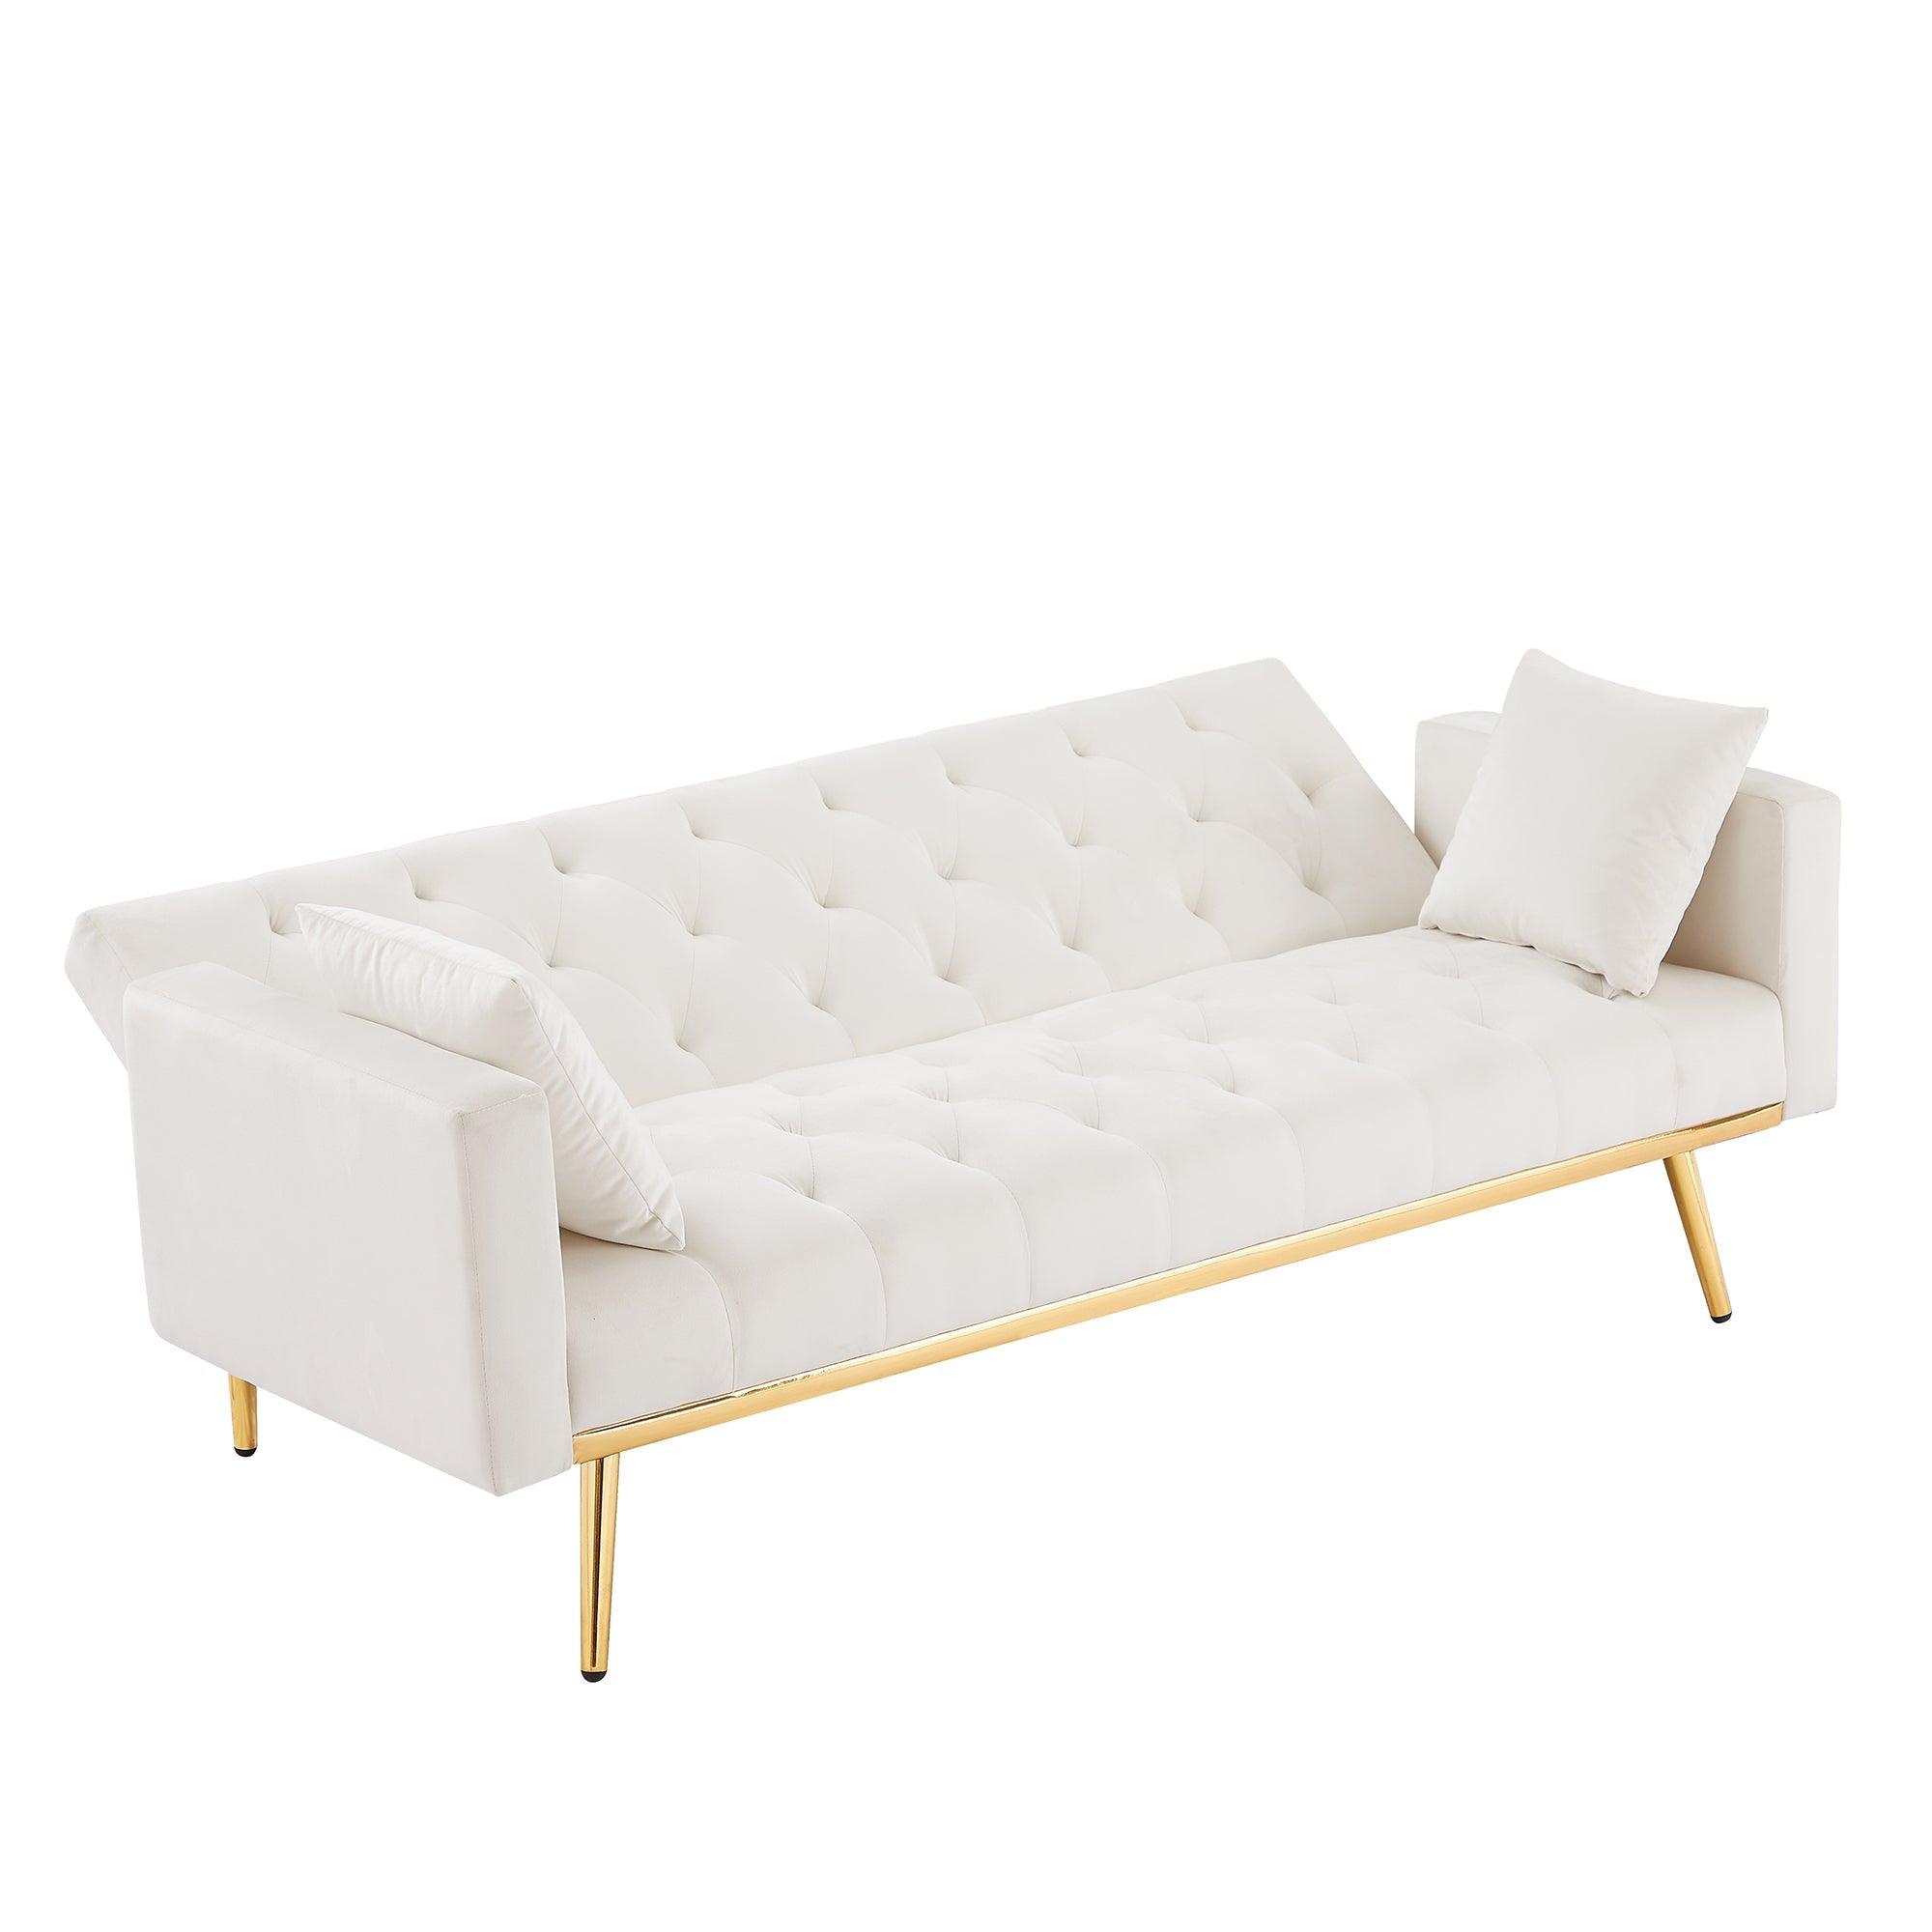 Cream White Convertible Folding Futon Sofa Bed, Sleeper Sofa Couch For Compact Living Space LamCham